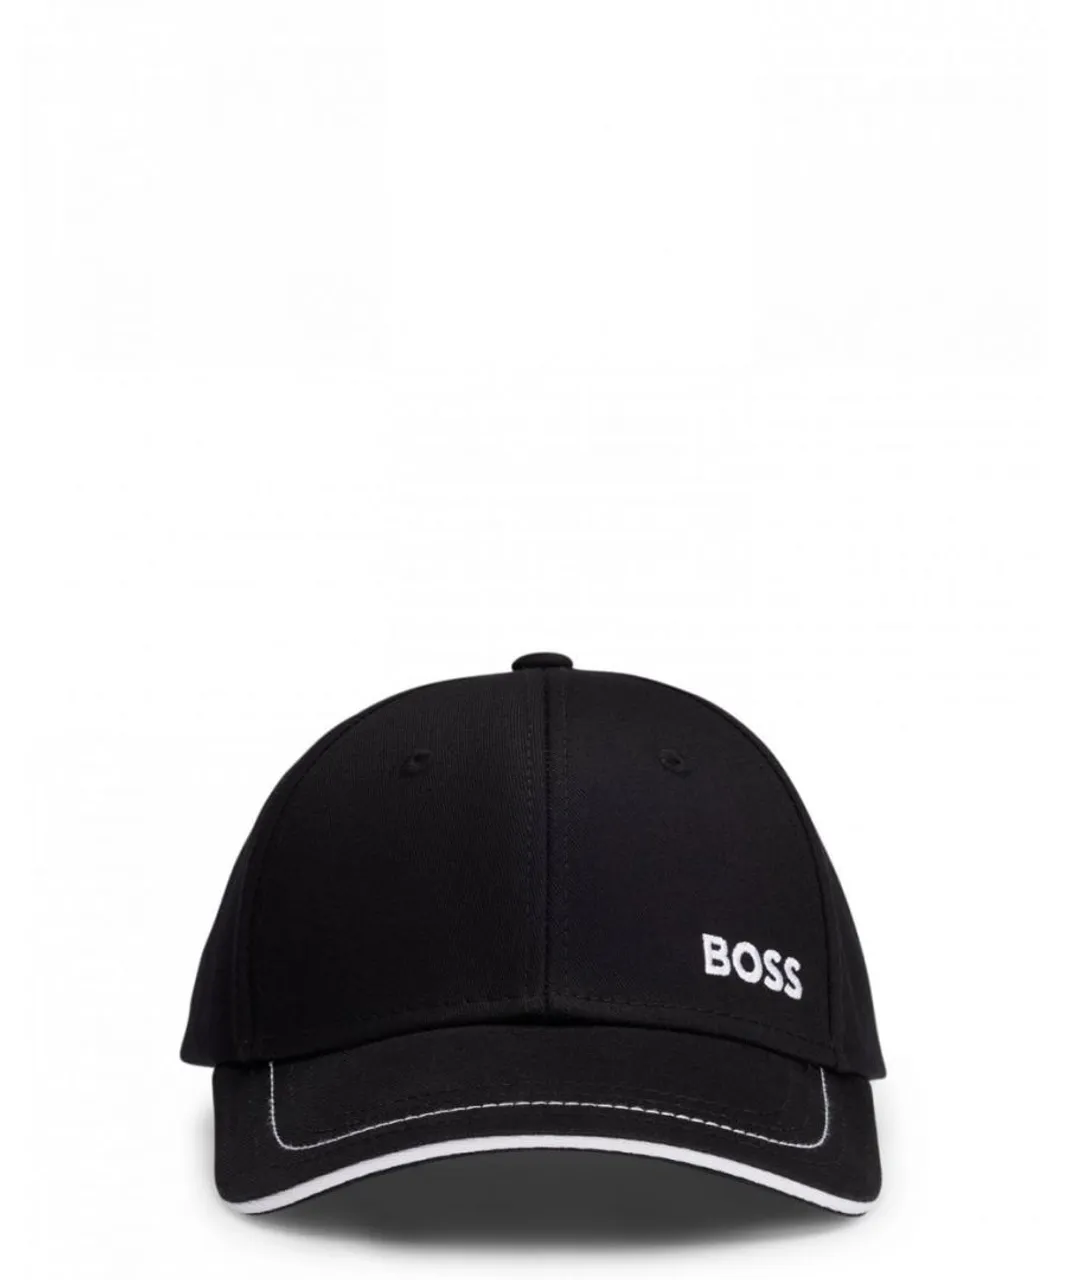 BOSS Green Cap-1 Mens Cotton-Twill Cap With Logo Detail - Black - One